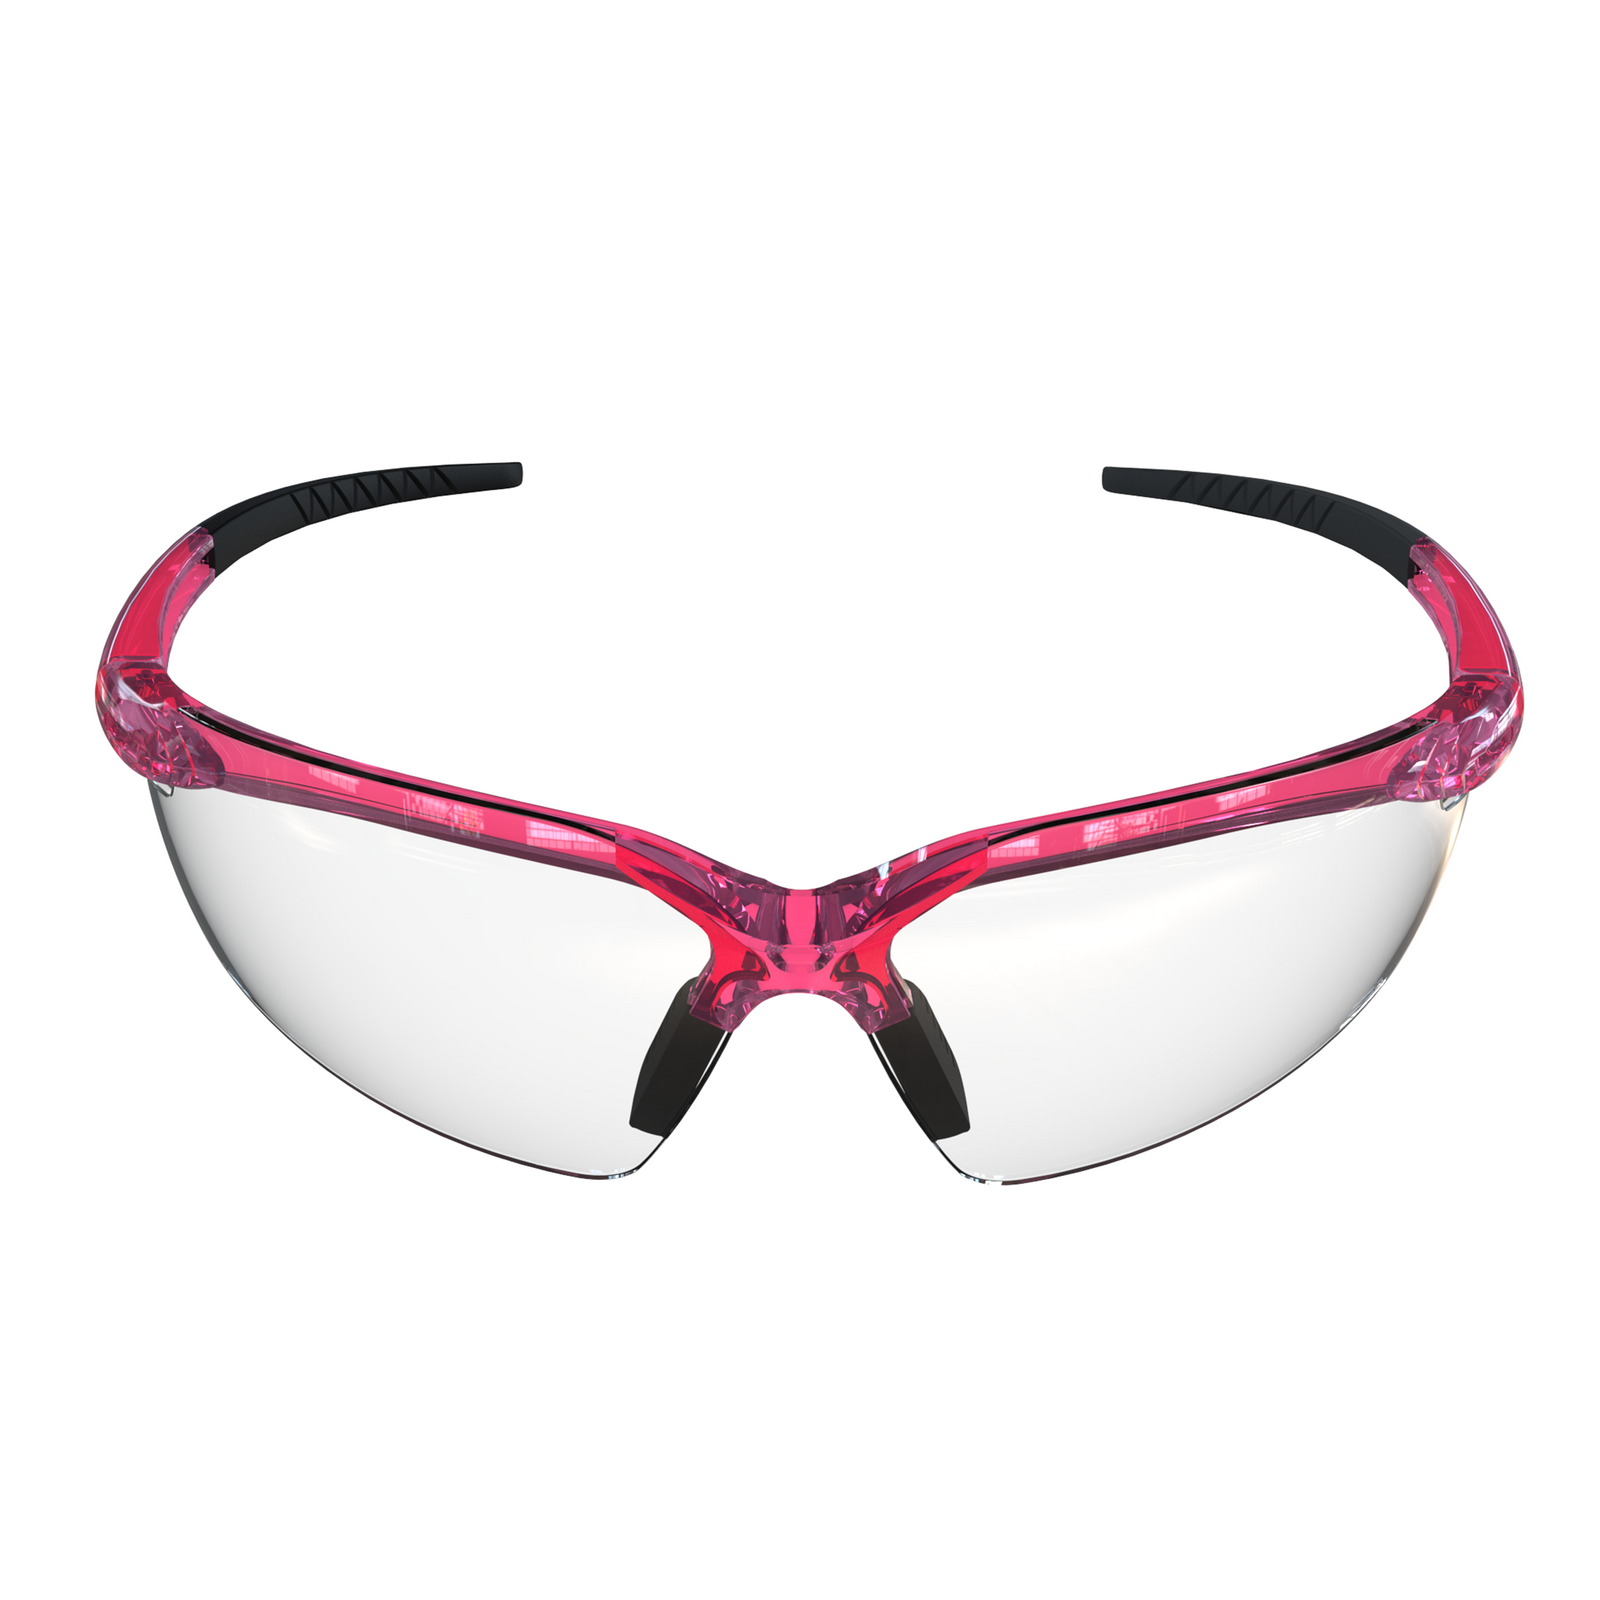 Safety glasses with flexible rubber temple tips color pink for women